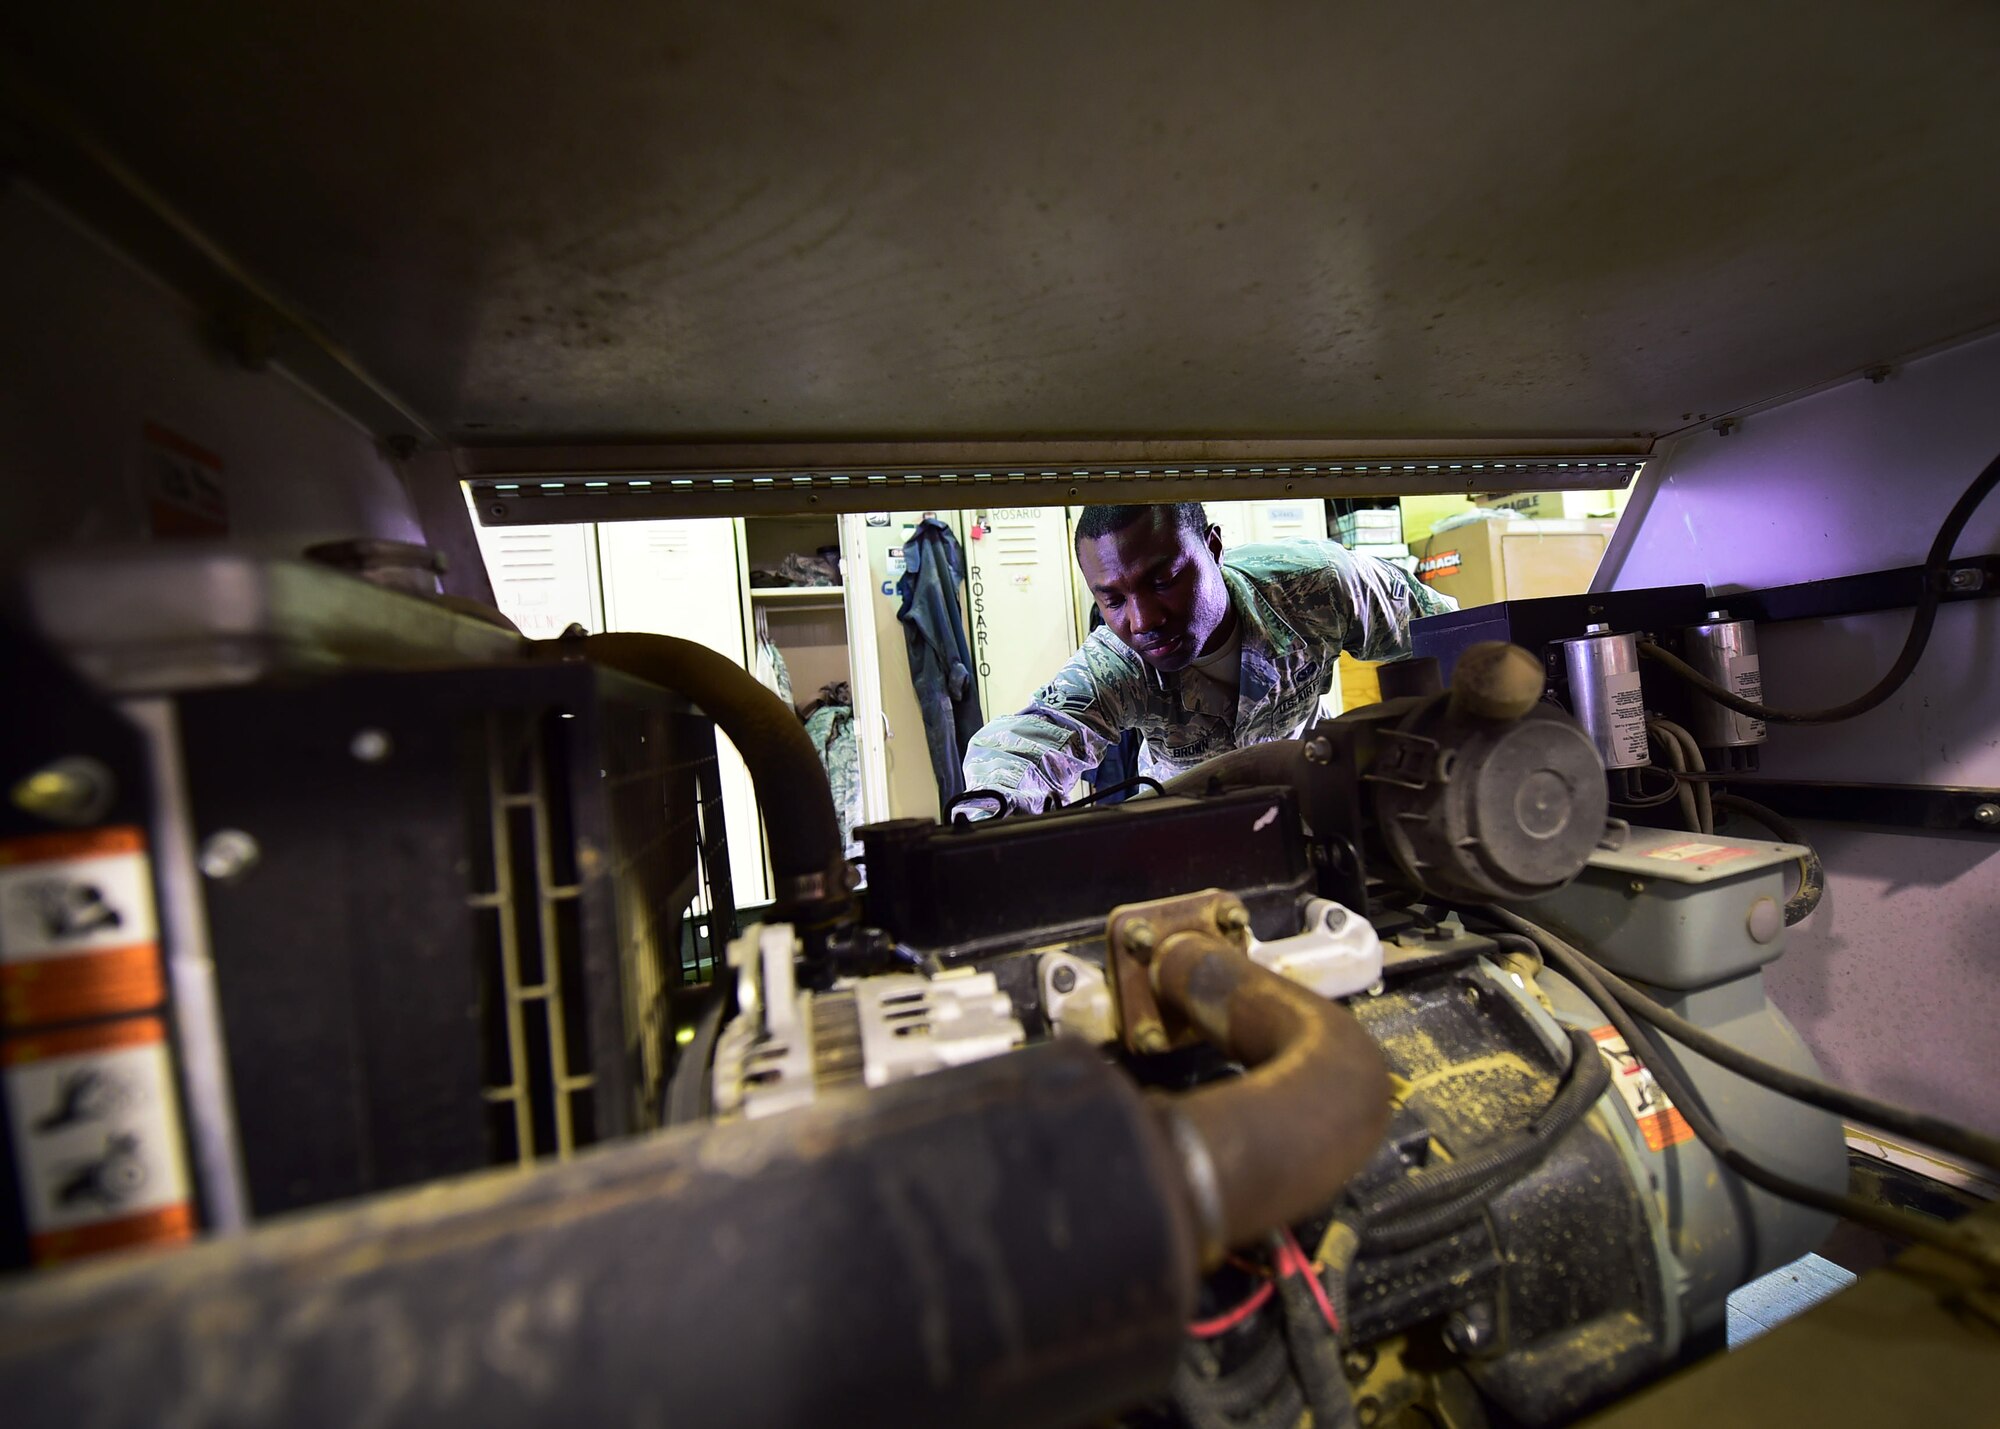 Airman 1st Class Timouy Brown, a 386th Expeditionary Civil Engineer Squadron electrical power production journeyman, inspects a light cart motor at an undisclosed location in Southwest Asia, Nov. 6, 2015. The power production shop services and maintains light carts which provides additional lighting throughout the installation and is convenient and mobile. Brown is deployed from the 319th Civil Engineer Squadron, Grand Forks Air Force Base in North Dakota. (U.S. Air Force photo by Staff Sgt. Jerilyn Quintanilla